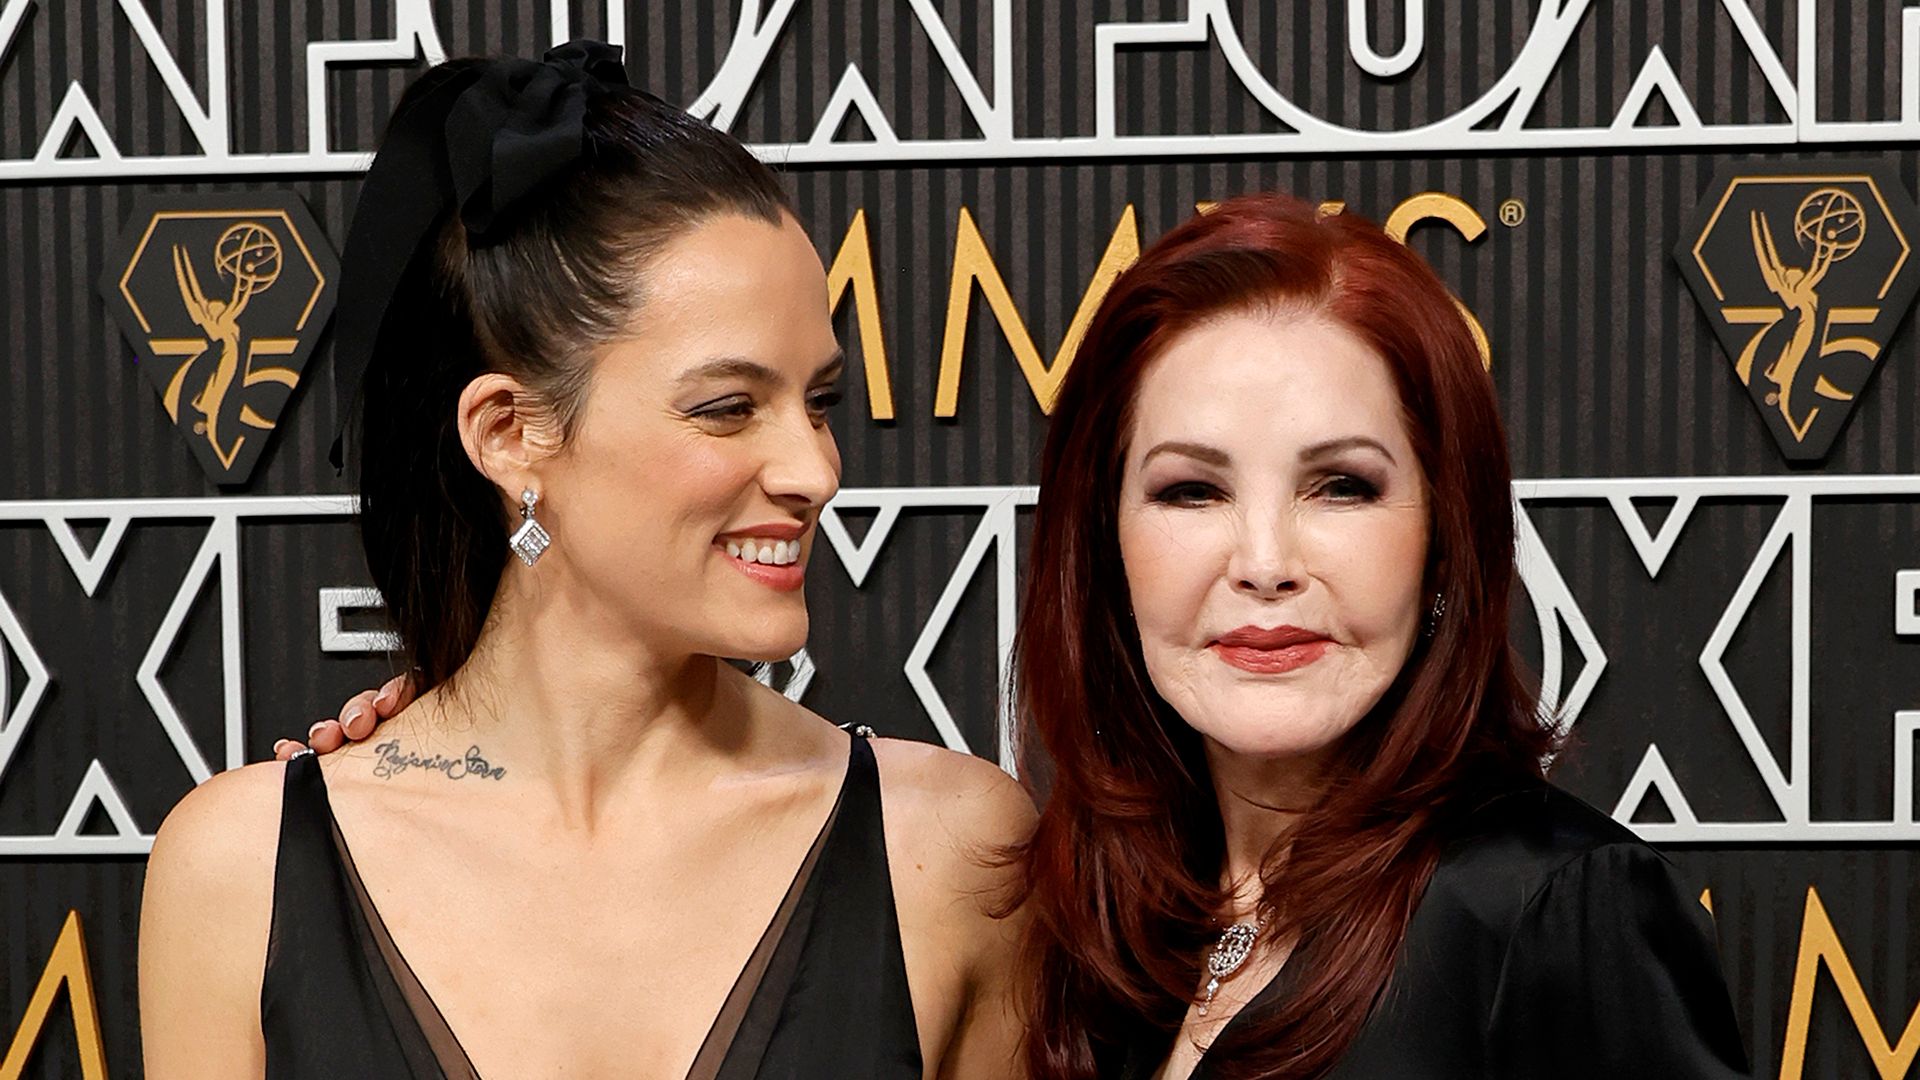 Riley Keough and Priscilla Presley reunite on the red carpet following